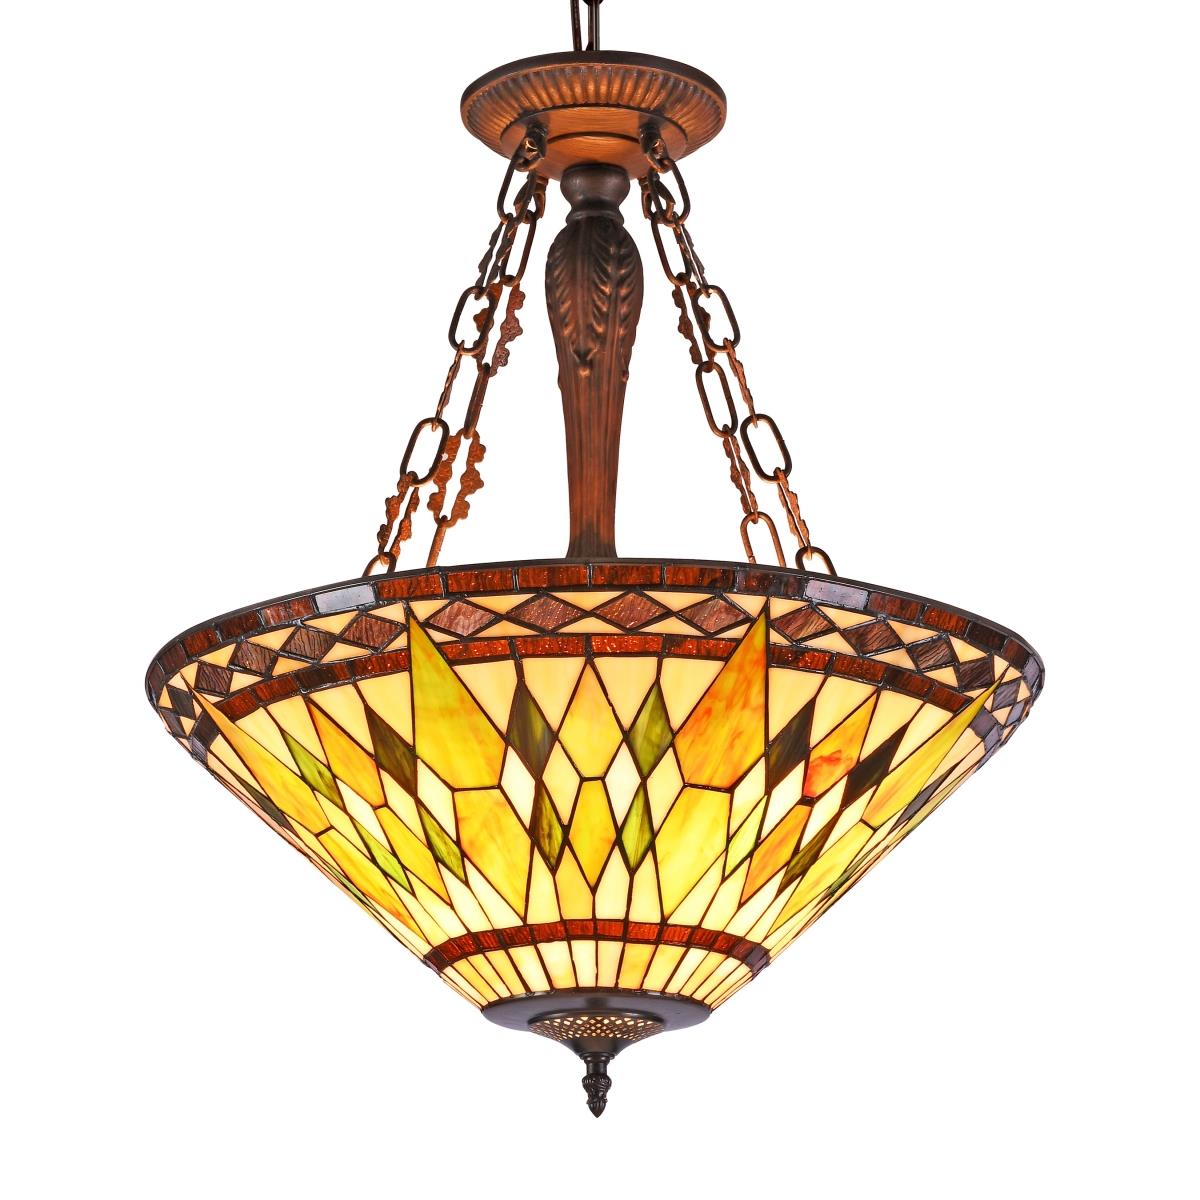 Ch36935ag20-uh3 Aiken Tiffany-style 3 Light Inverted Ceiling Pendant - 20 In. Shade